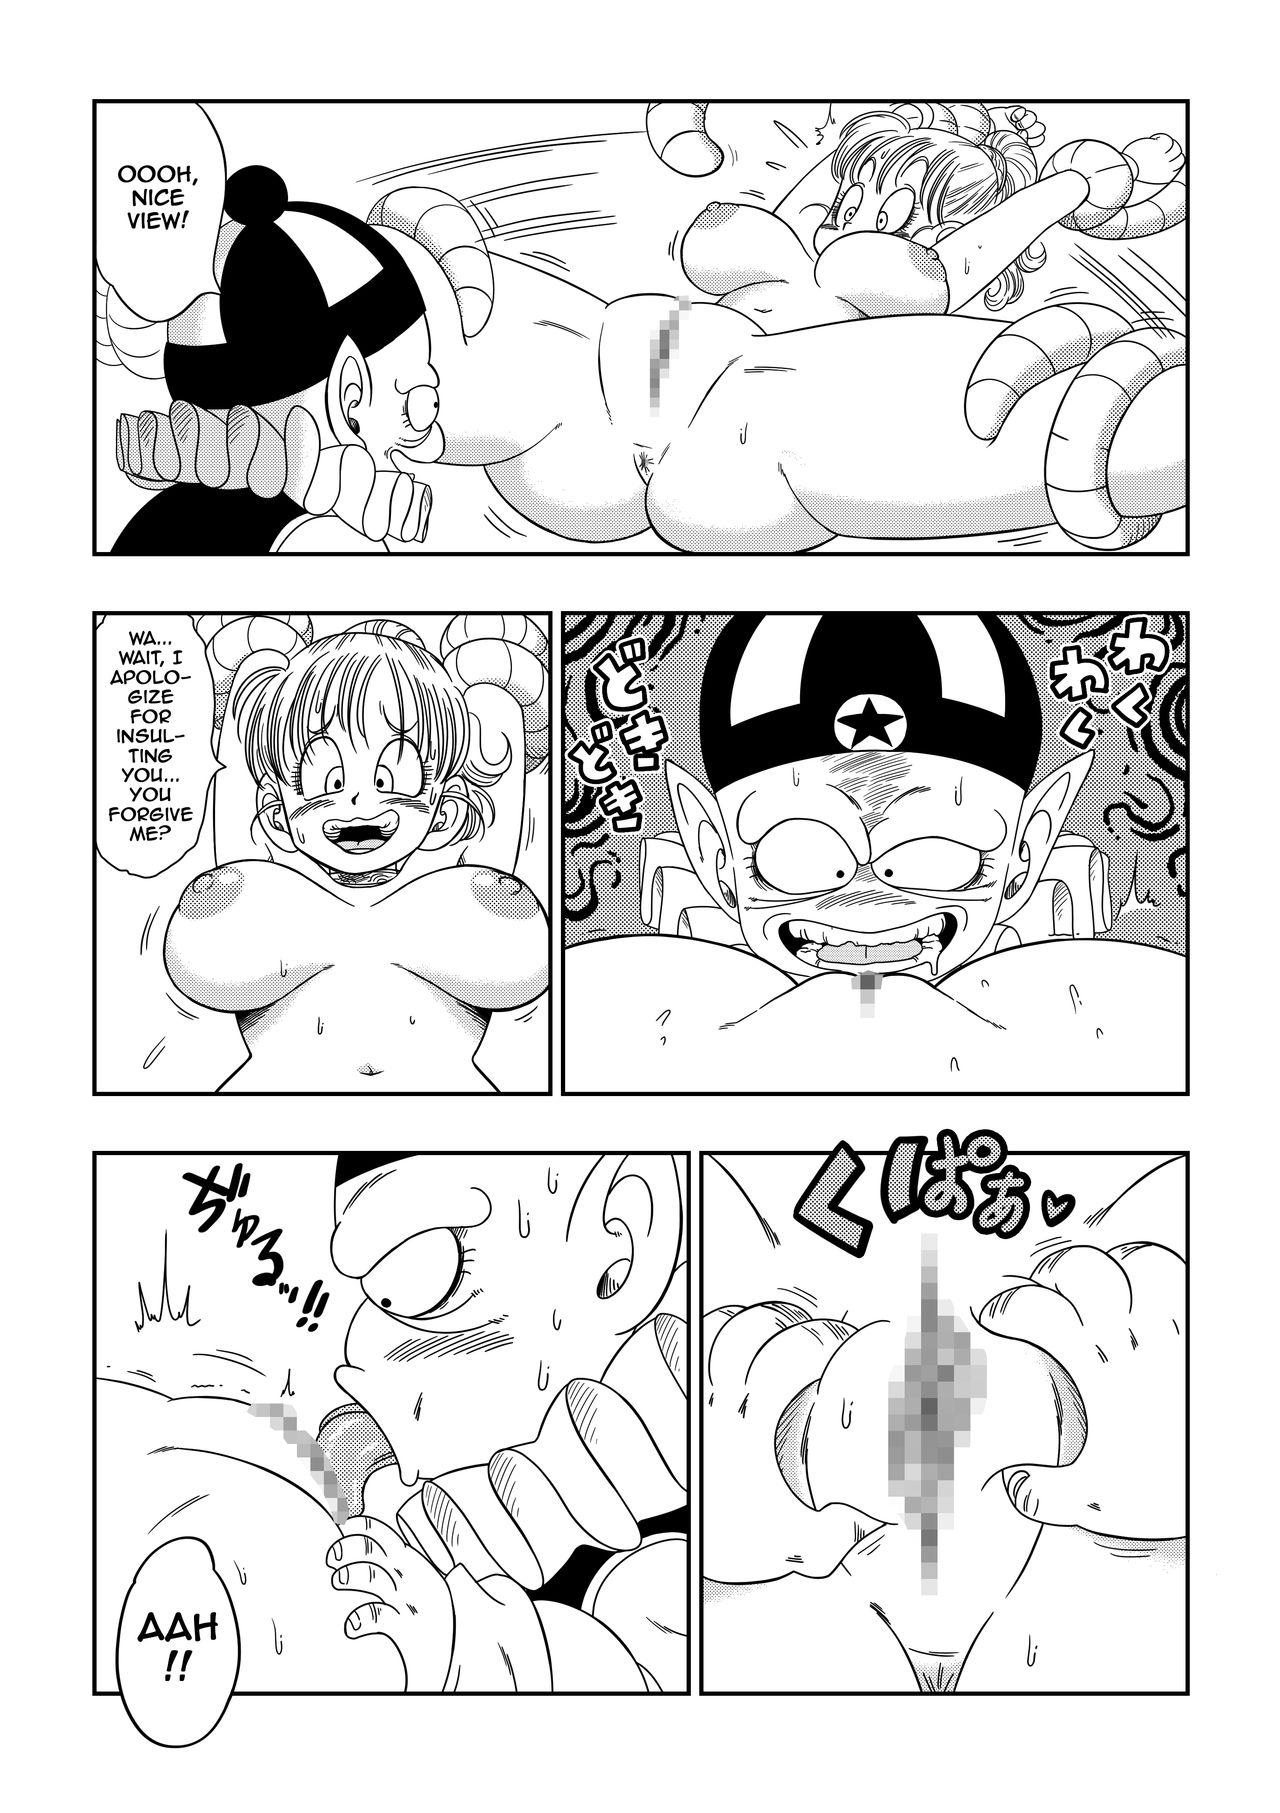 Boobies Dagon Ball - Punishment in Pilaf's Castle - Dragon ball Chick - Page 6